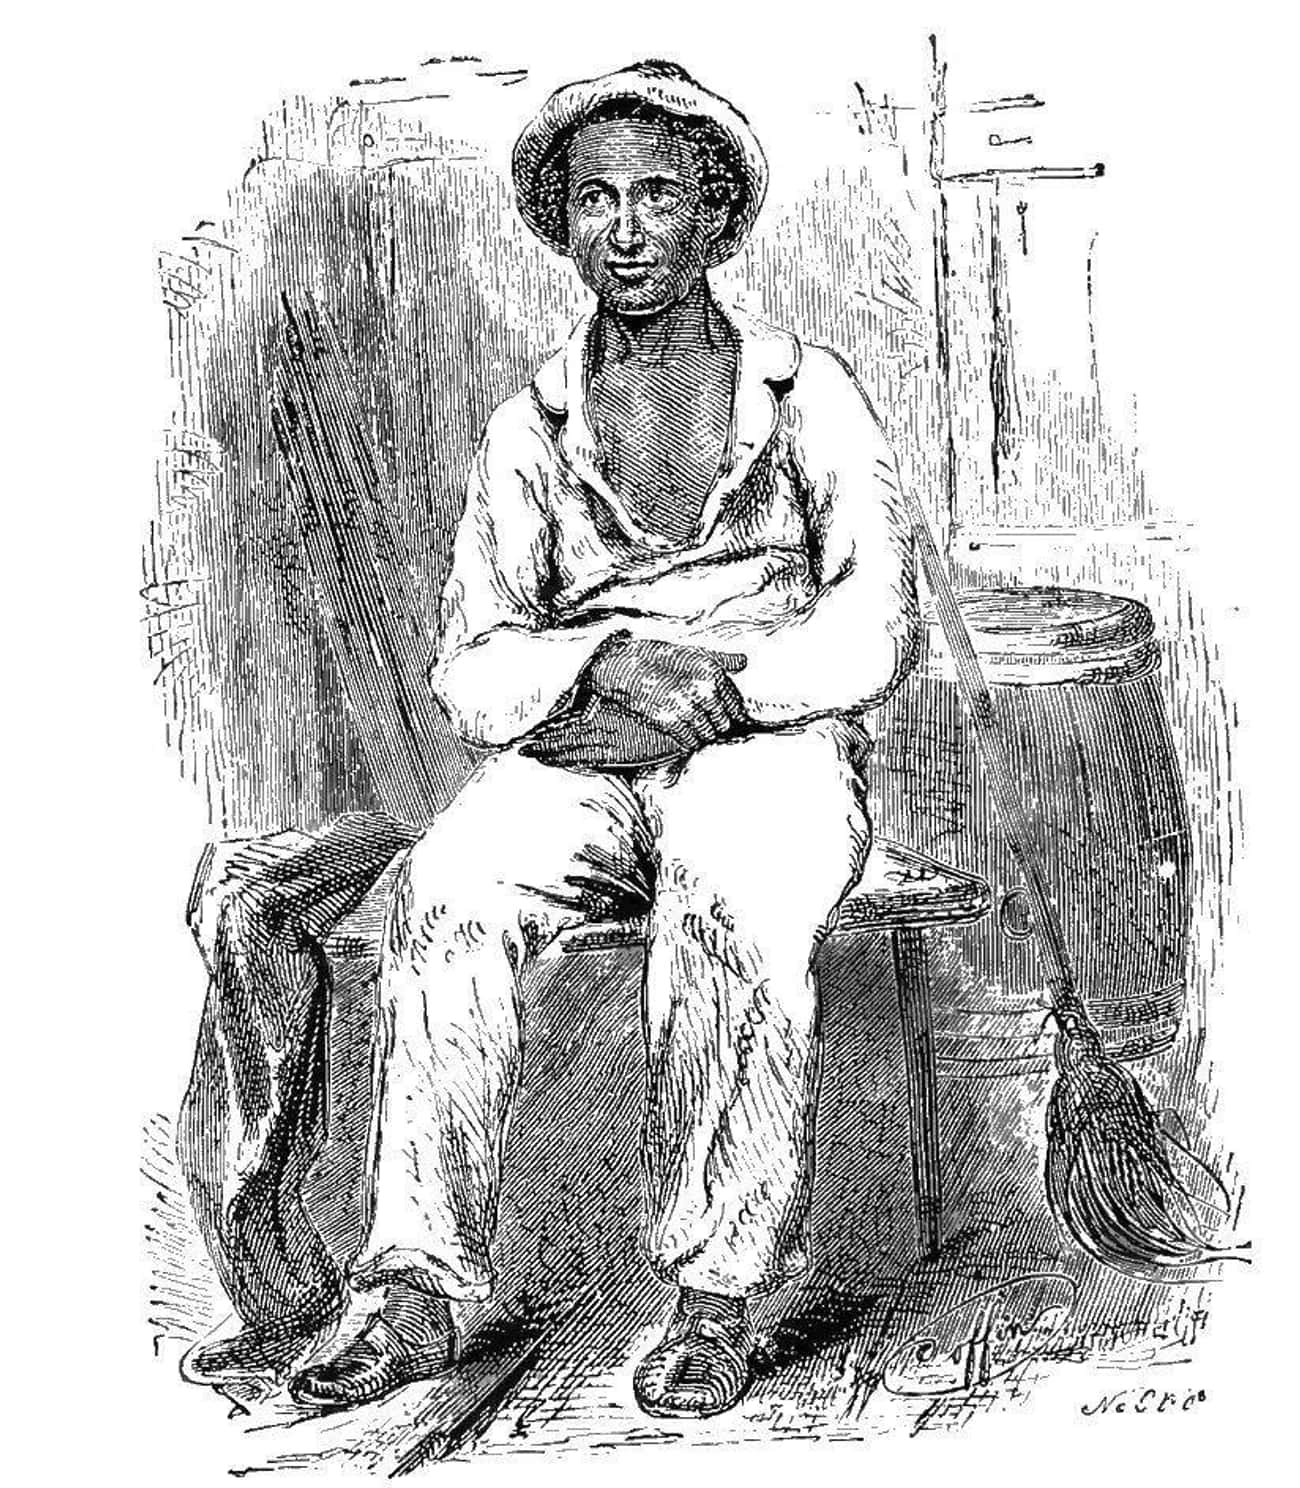 The Fugitive Slave Acts Led To Some Bounty Hunters Kidnapping Free Black People And Selling Them Into Slavery